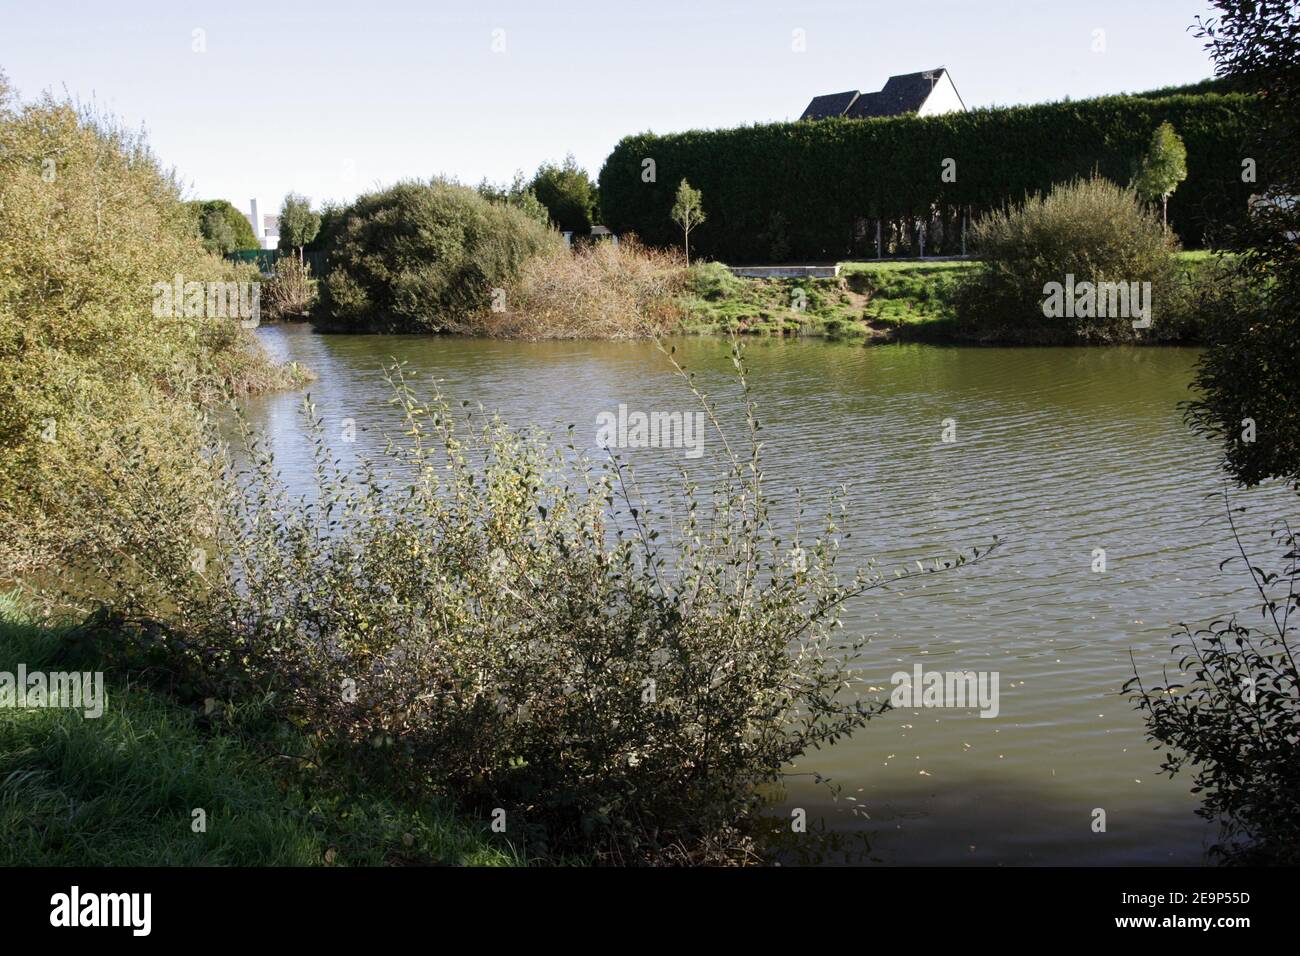 Aline Lelievre mother of 14 months old David admitts killing her son and put him in a lake beside her house in Redon, France on November 3, 2006. Photo by Mousse/ABACAPRESS.COM Stock Photo